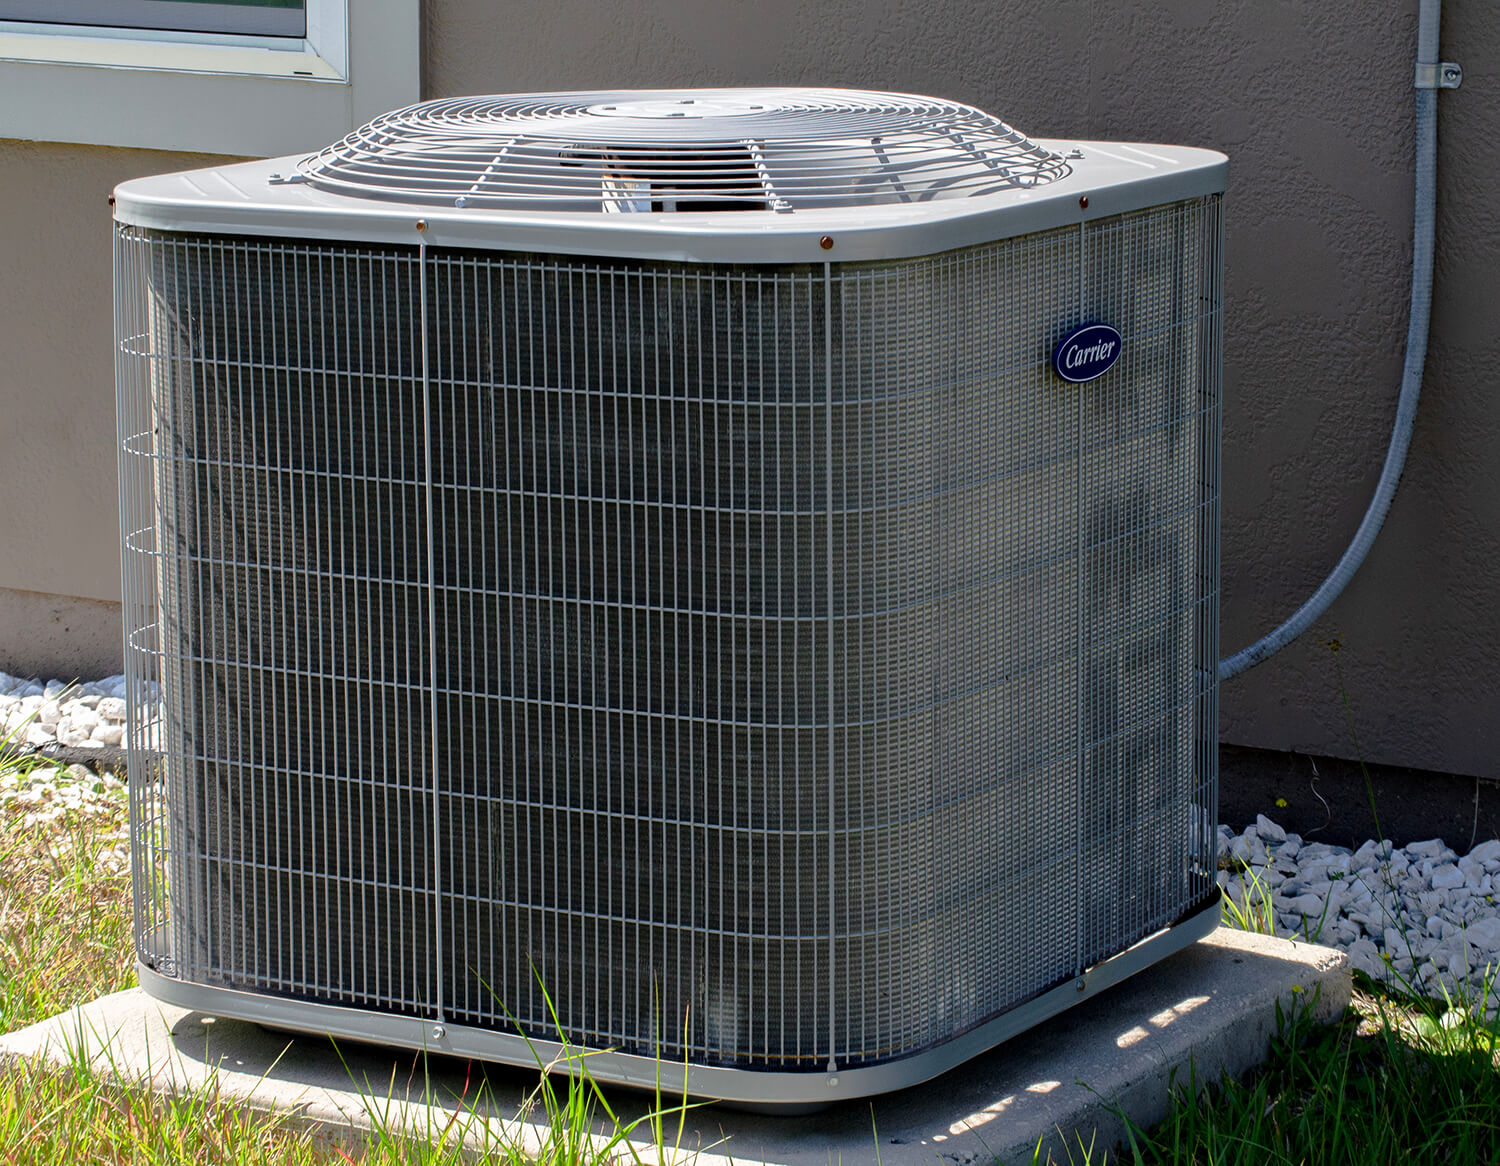 Some deciding factors when installing a brand new Heating plus Air Conditioning system into your home